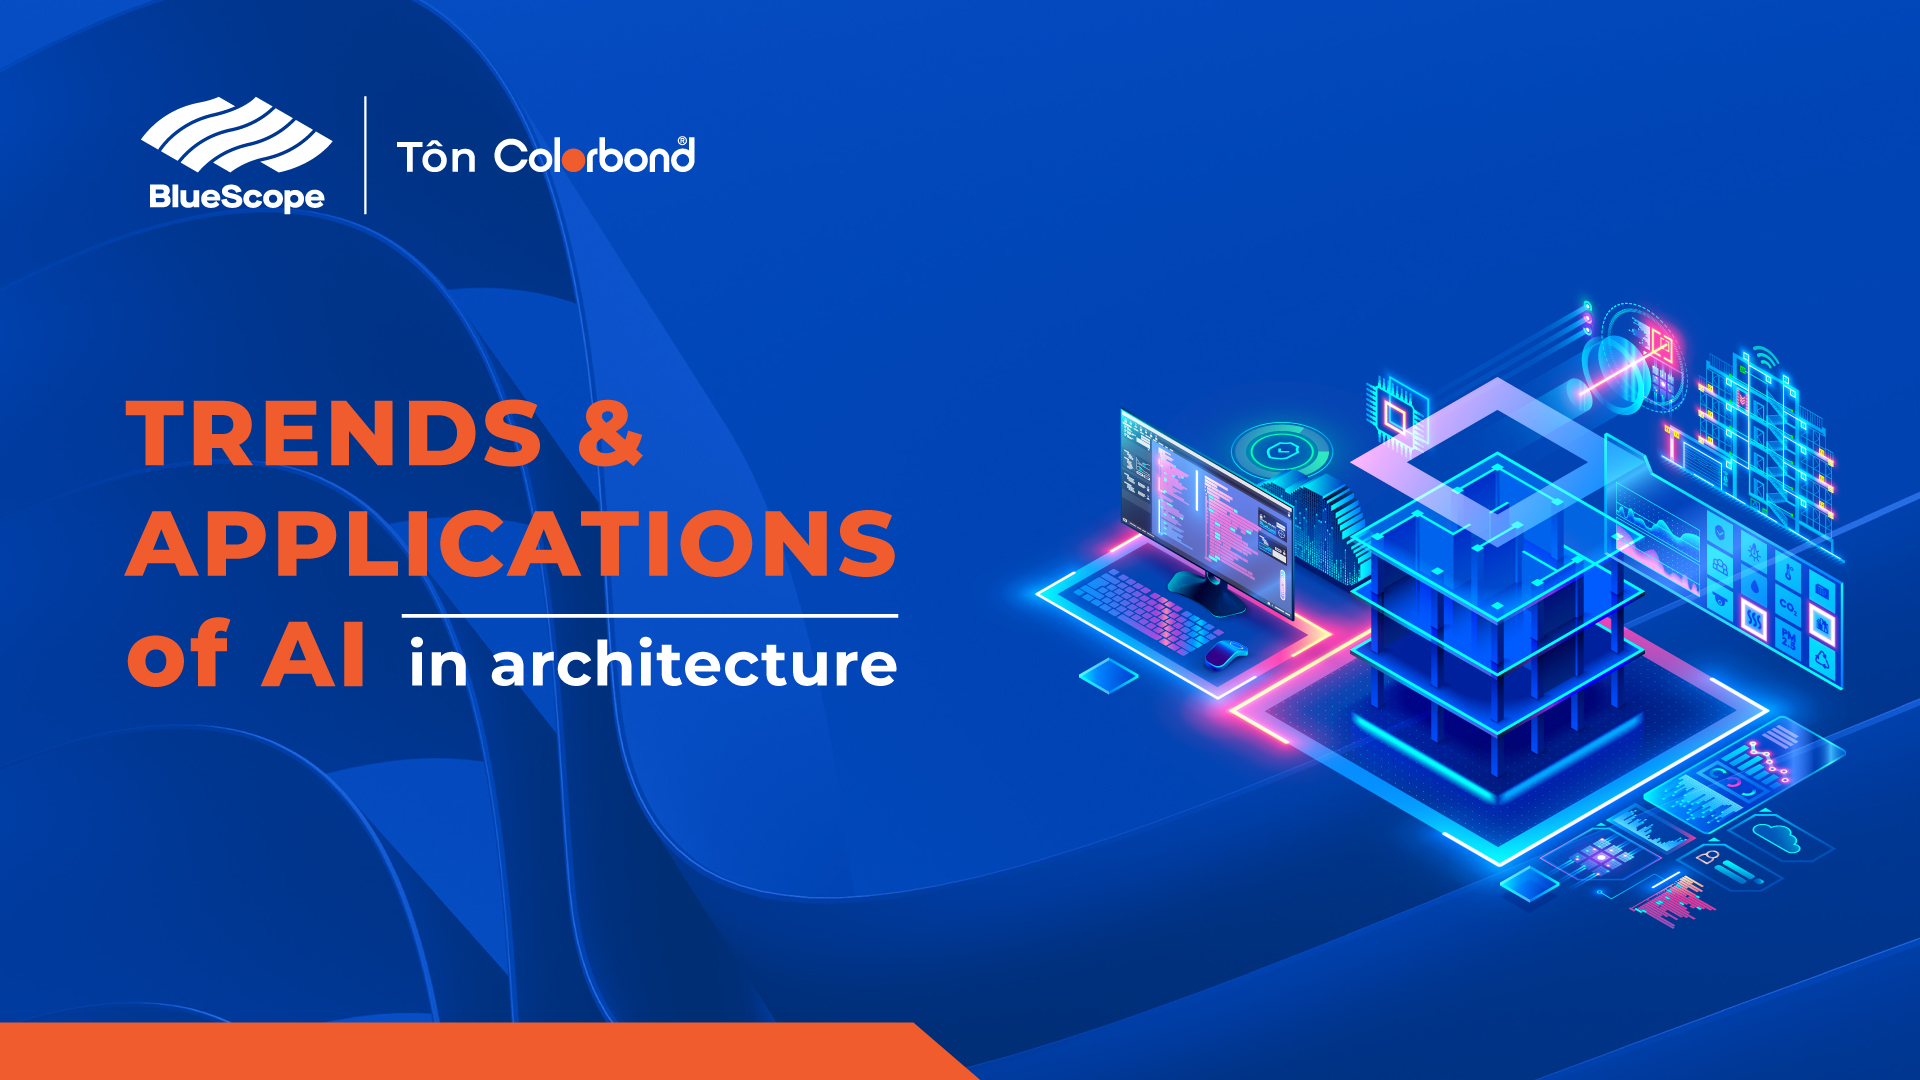 WORKSHOP SERIES “TRENDS AND APPLICATIONS OF AI IN ARCHITECTURE”